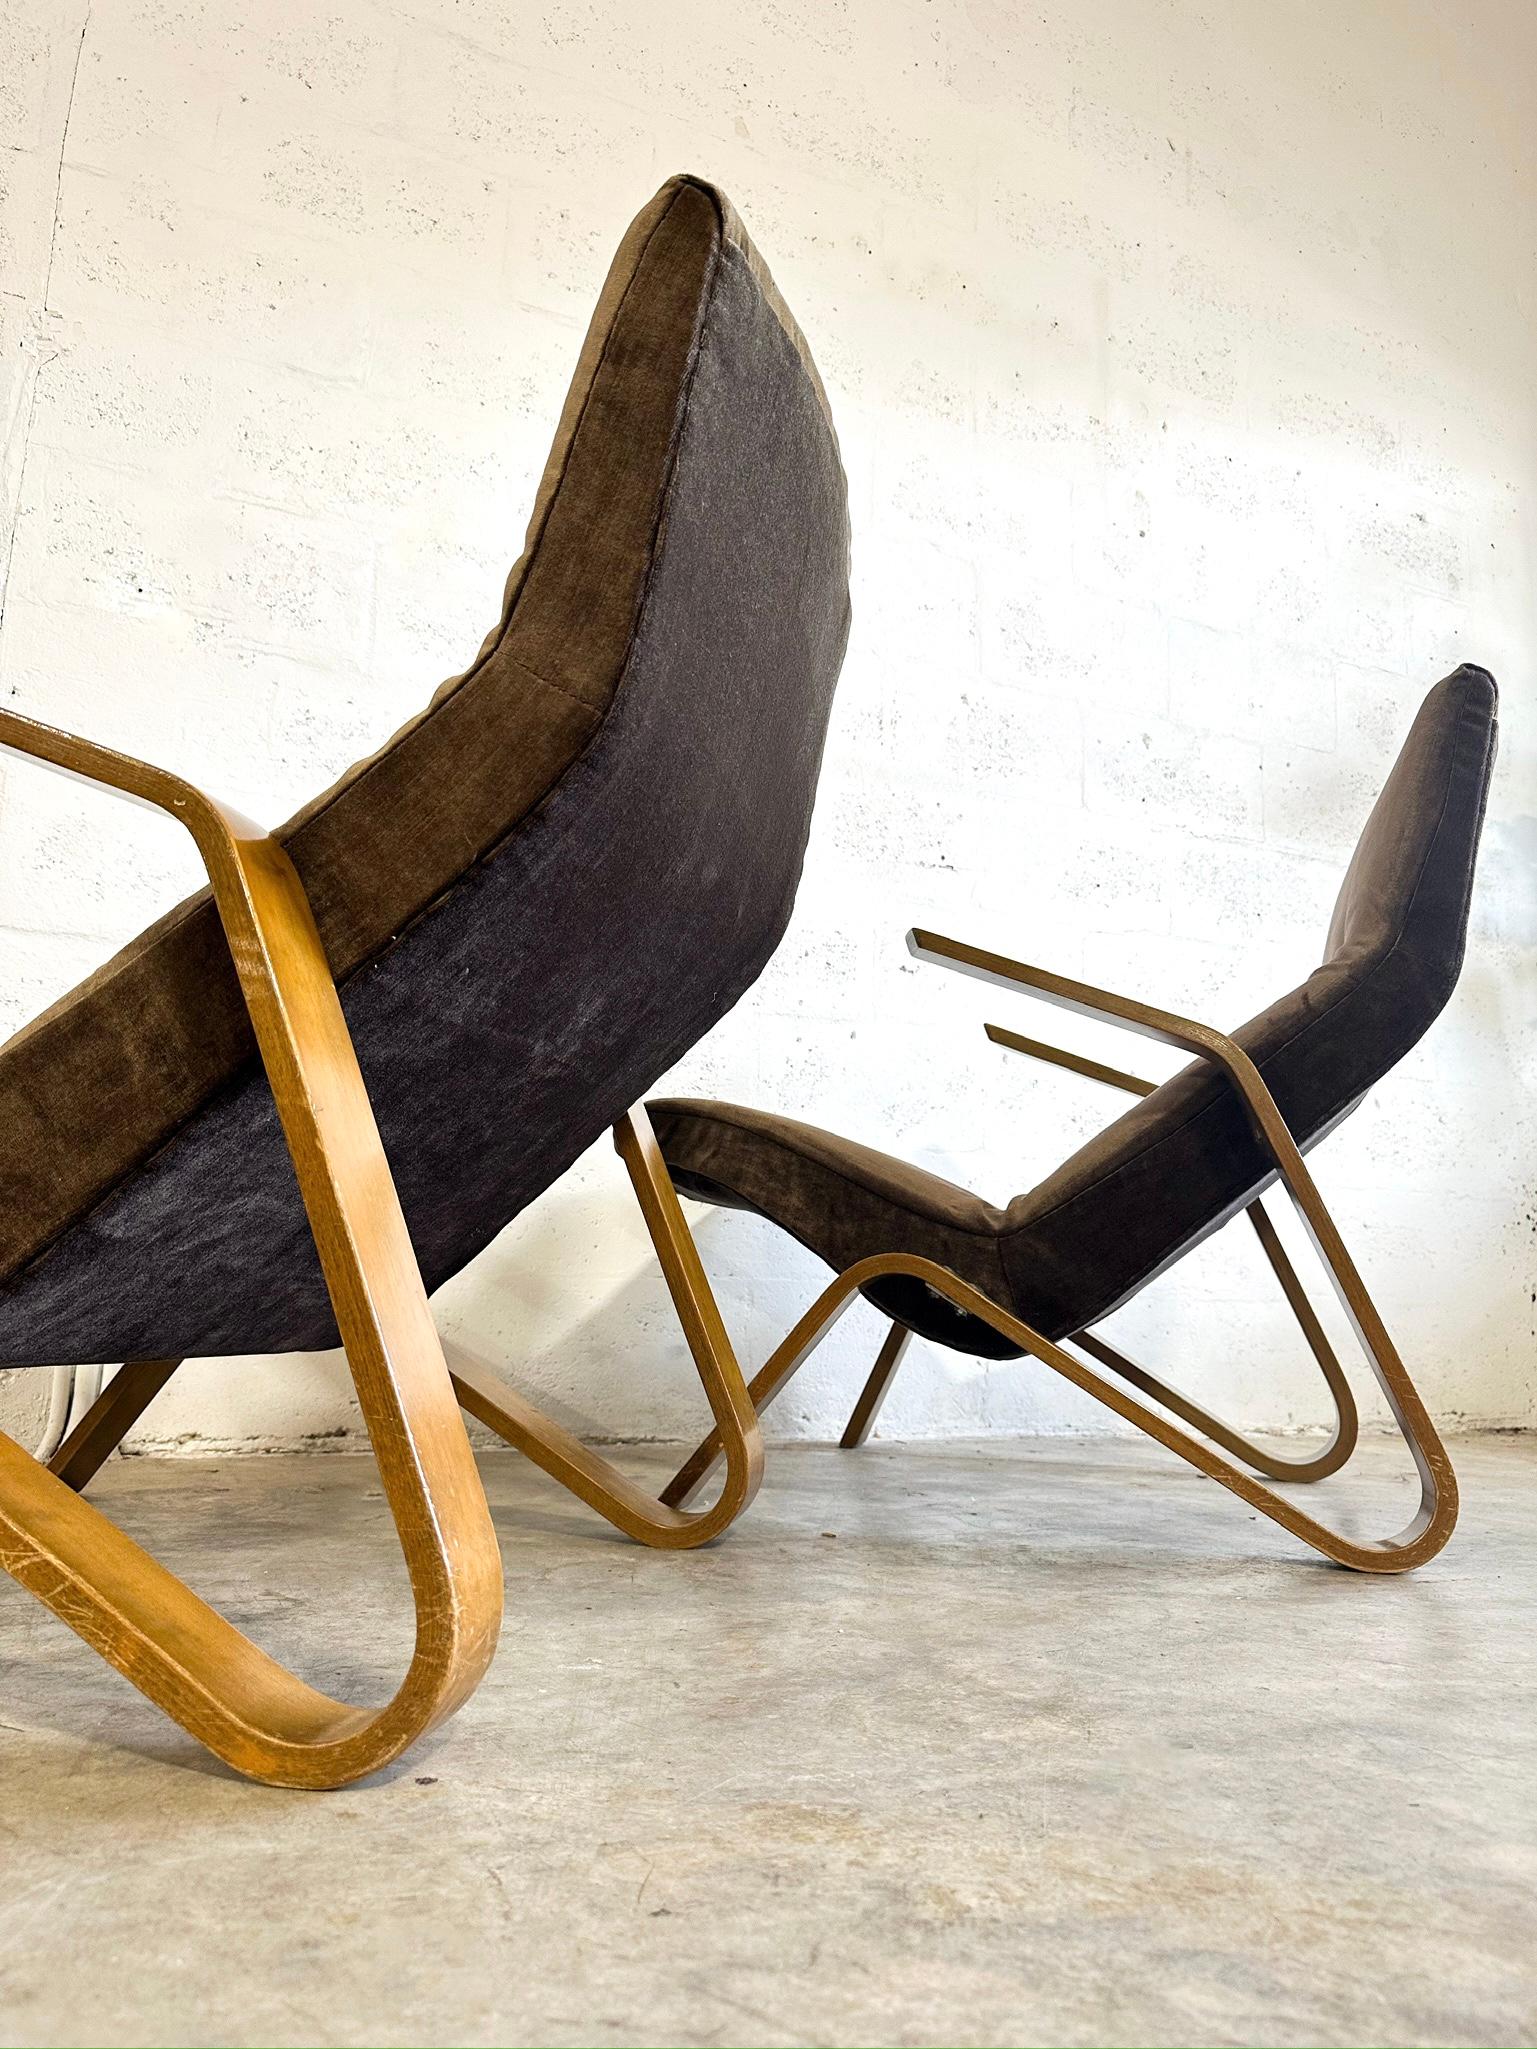 Grasshoper Chairs designed by Knoll and created by Eero Saarinen. This was Saarinen’s first chair for Knoll in the 40s